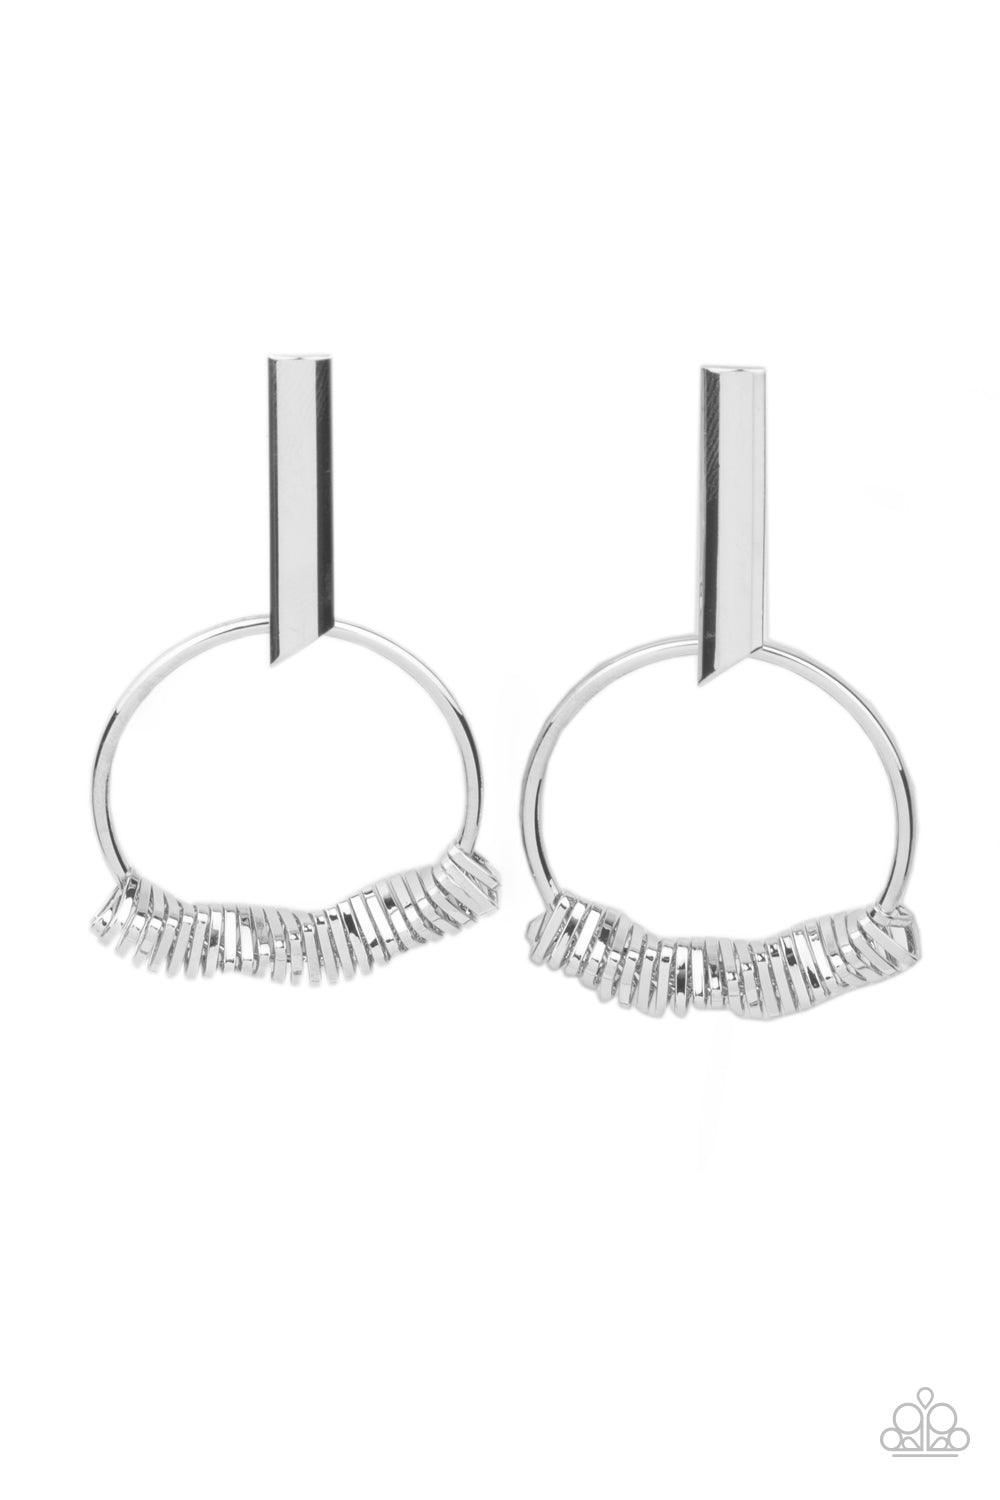 Paparazzi Accessories Set Into Motion - Silver Glistening silver triangular rings are delicately fitted in place along the bottom of a dainty silver hoop, creating the illusion of twisting movement. The edgy hoop links to a silver rectangular hoop, creati